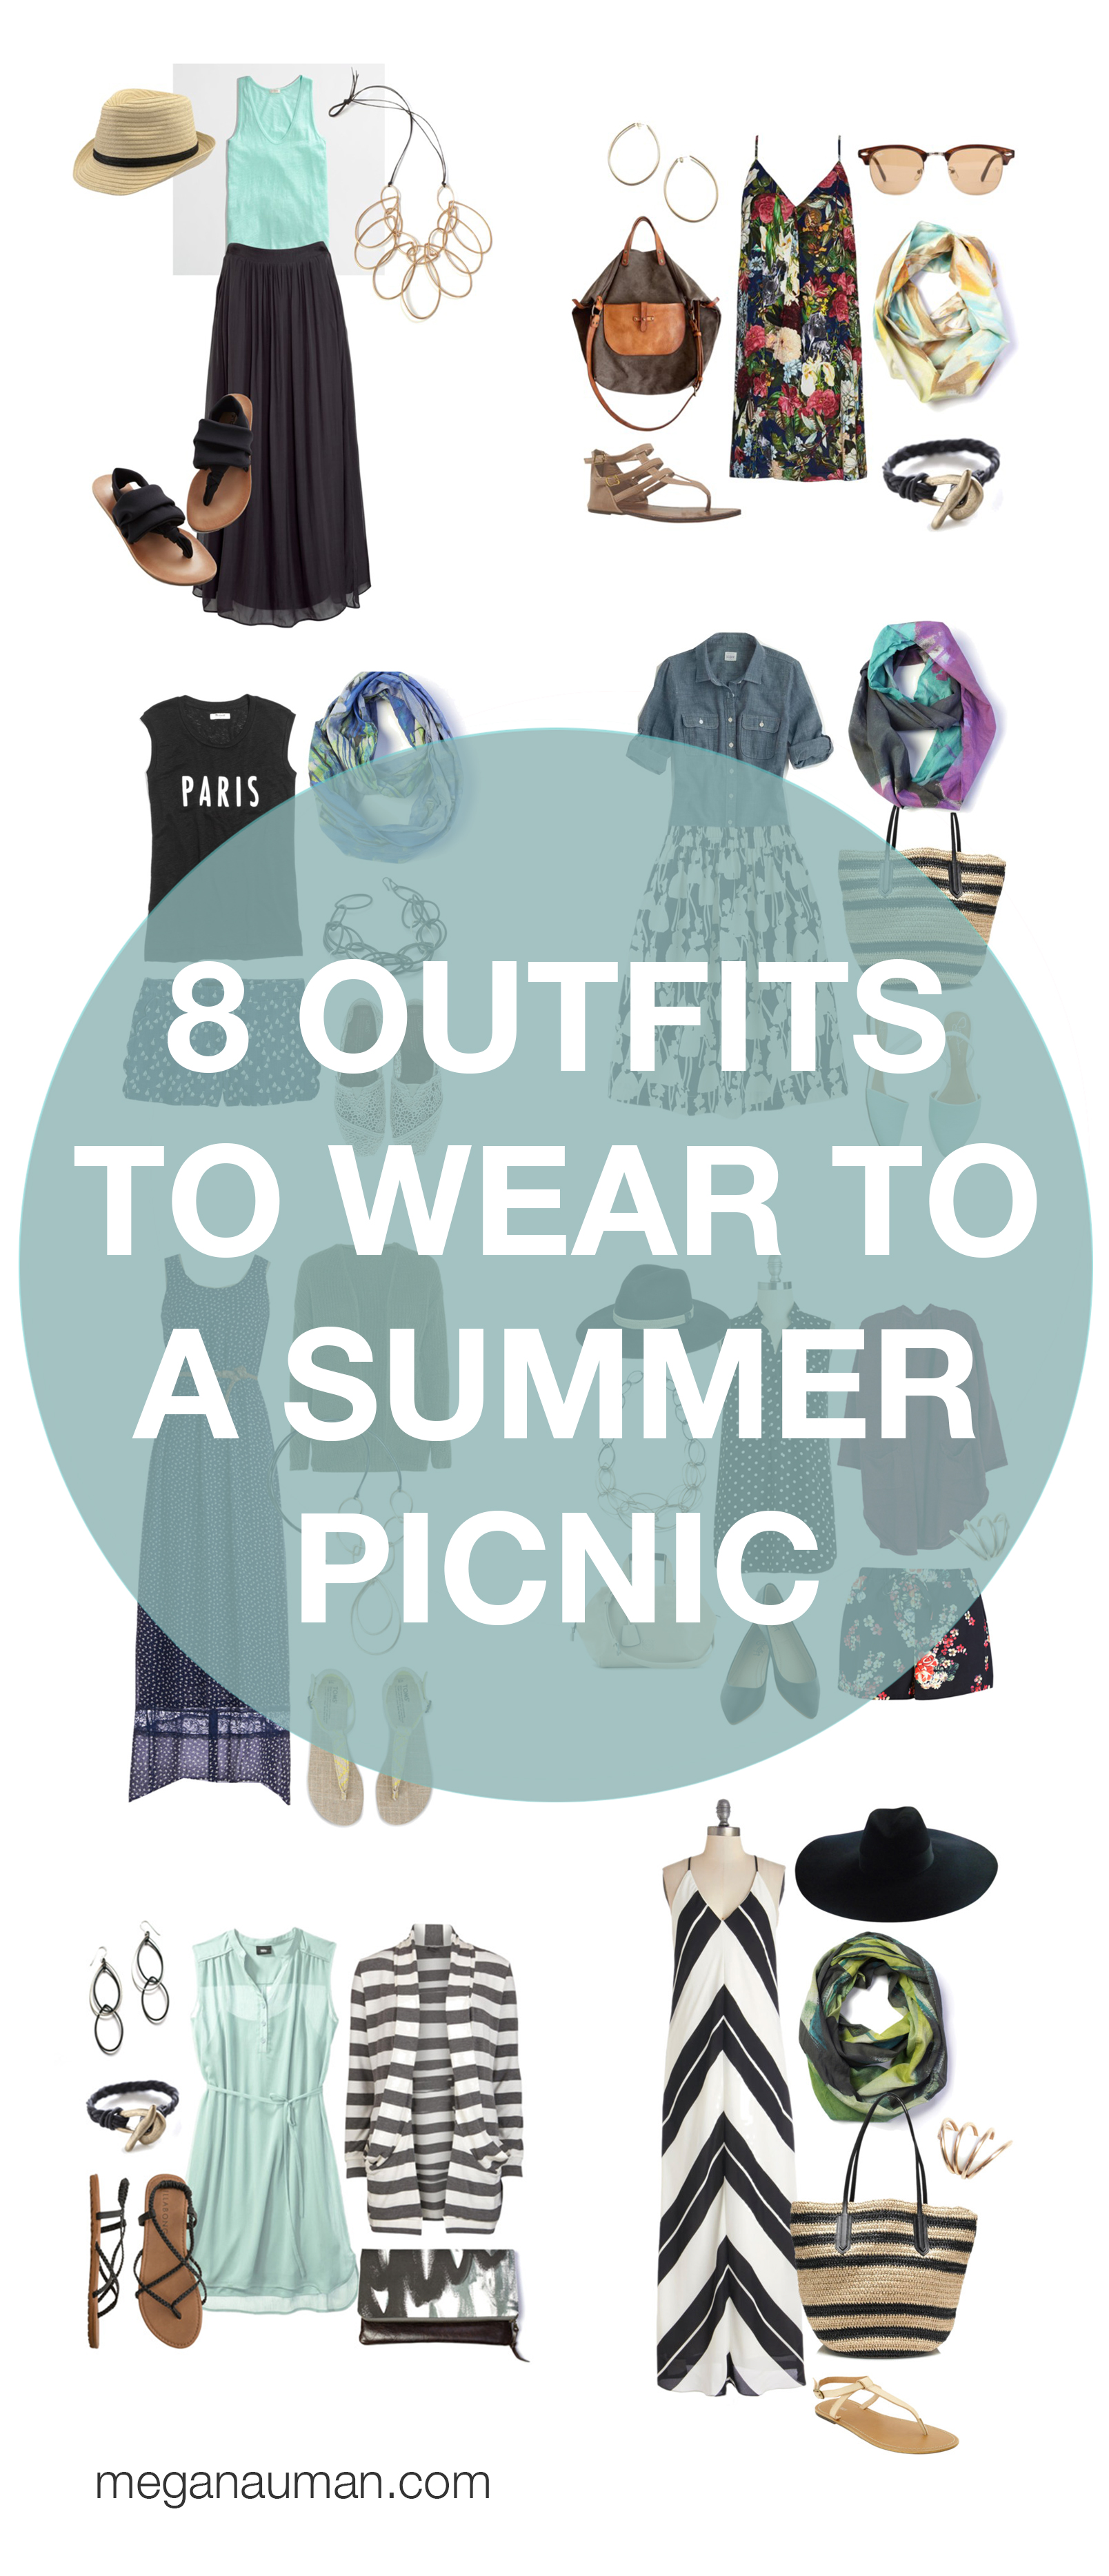 summer style: 8 outfits to wear to a summer picnic - MEGAN AUMAN